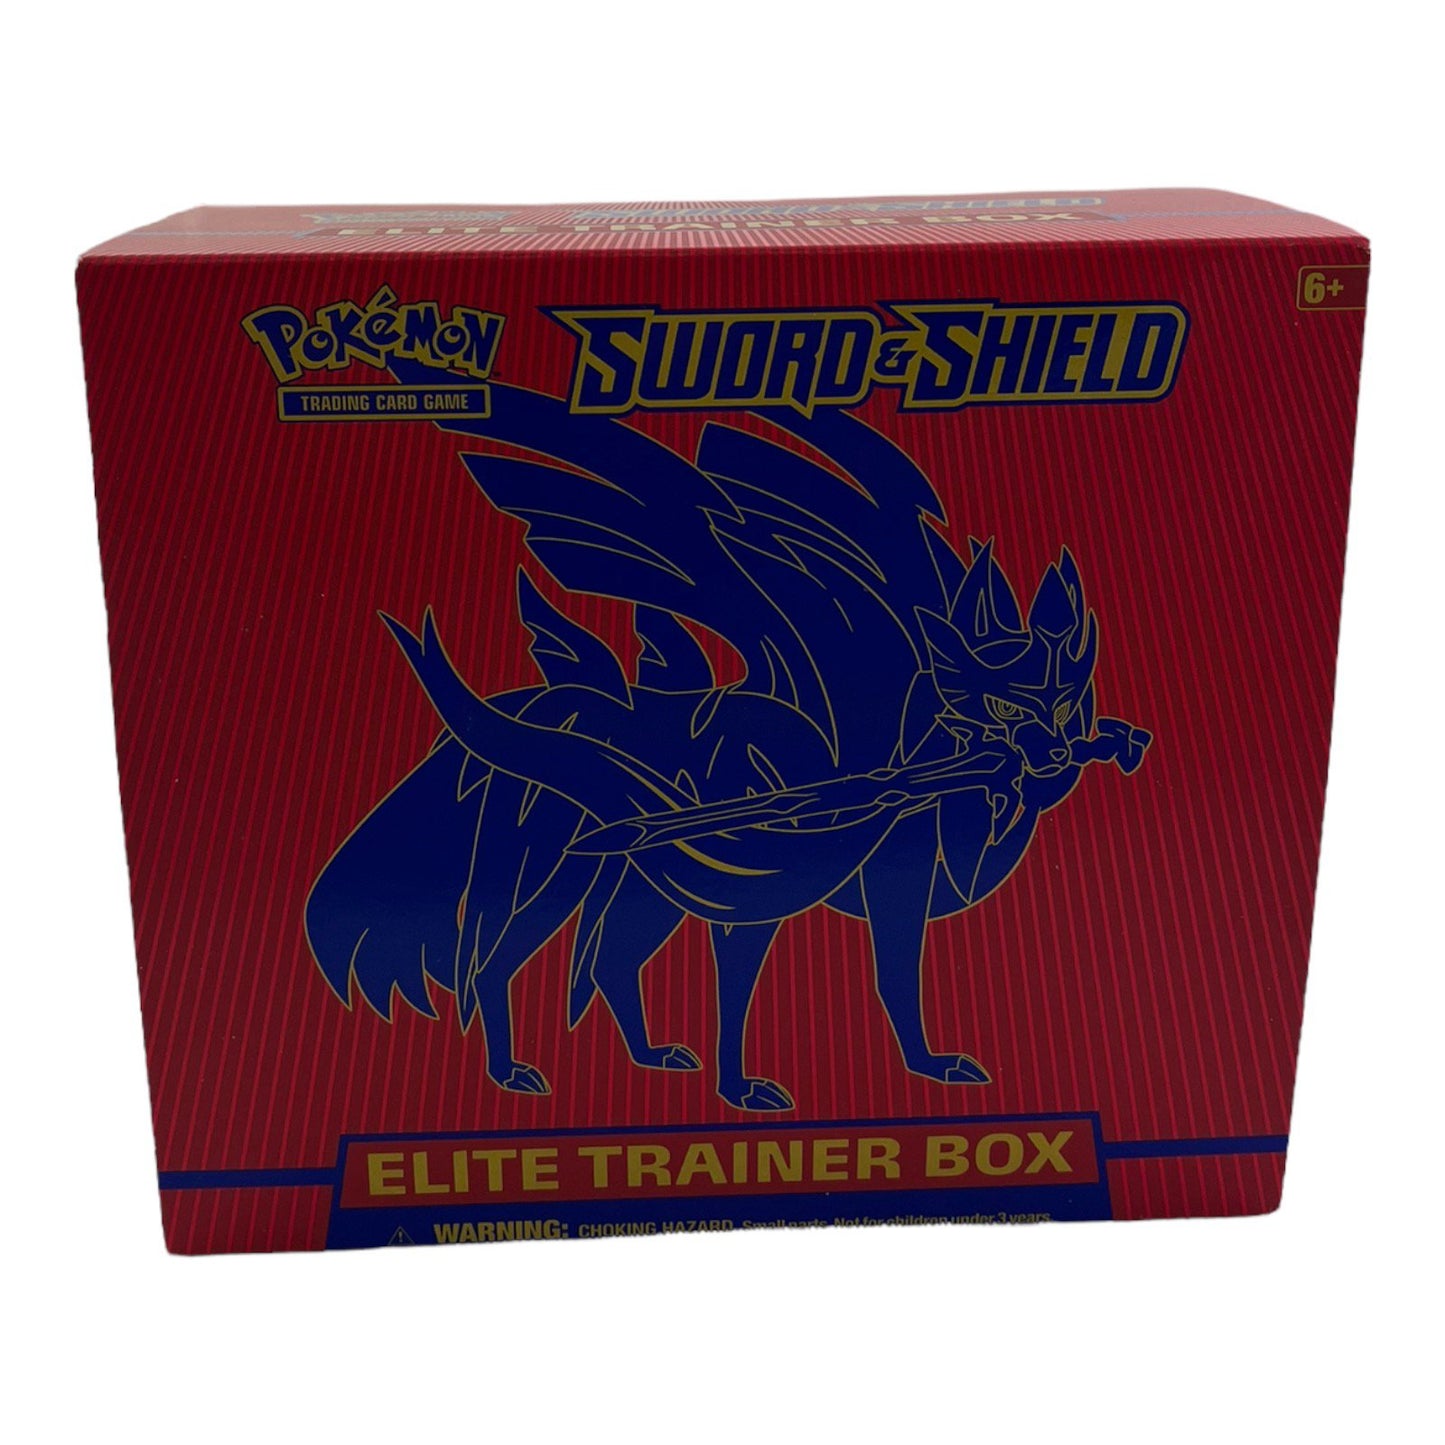 Pokemon Trading Card Game Sword & Shield Trainer Box No Booster Packs